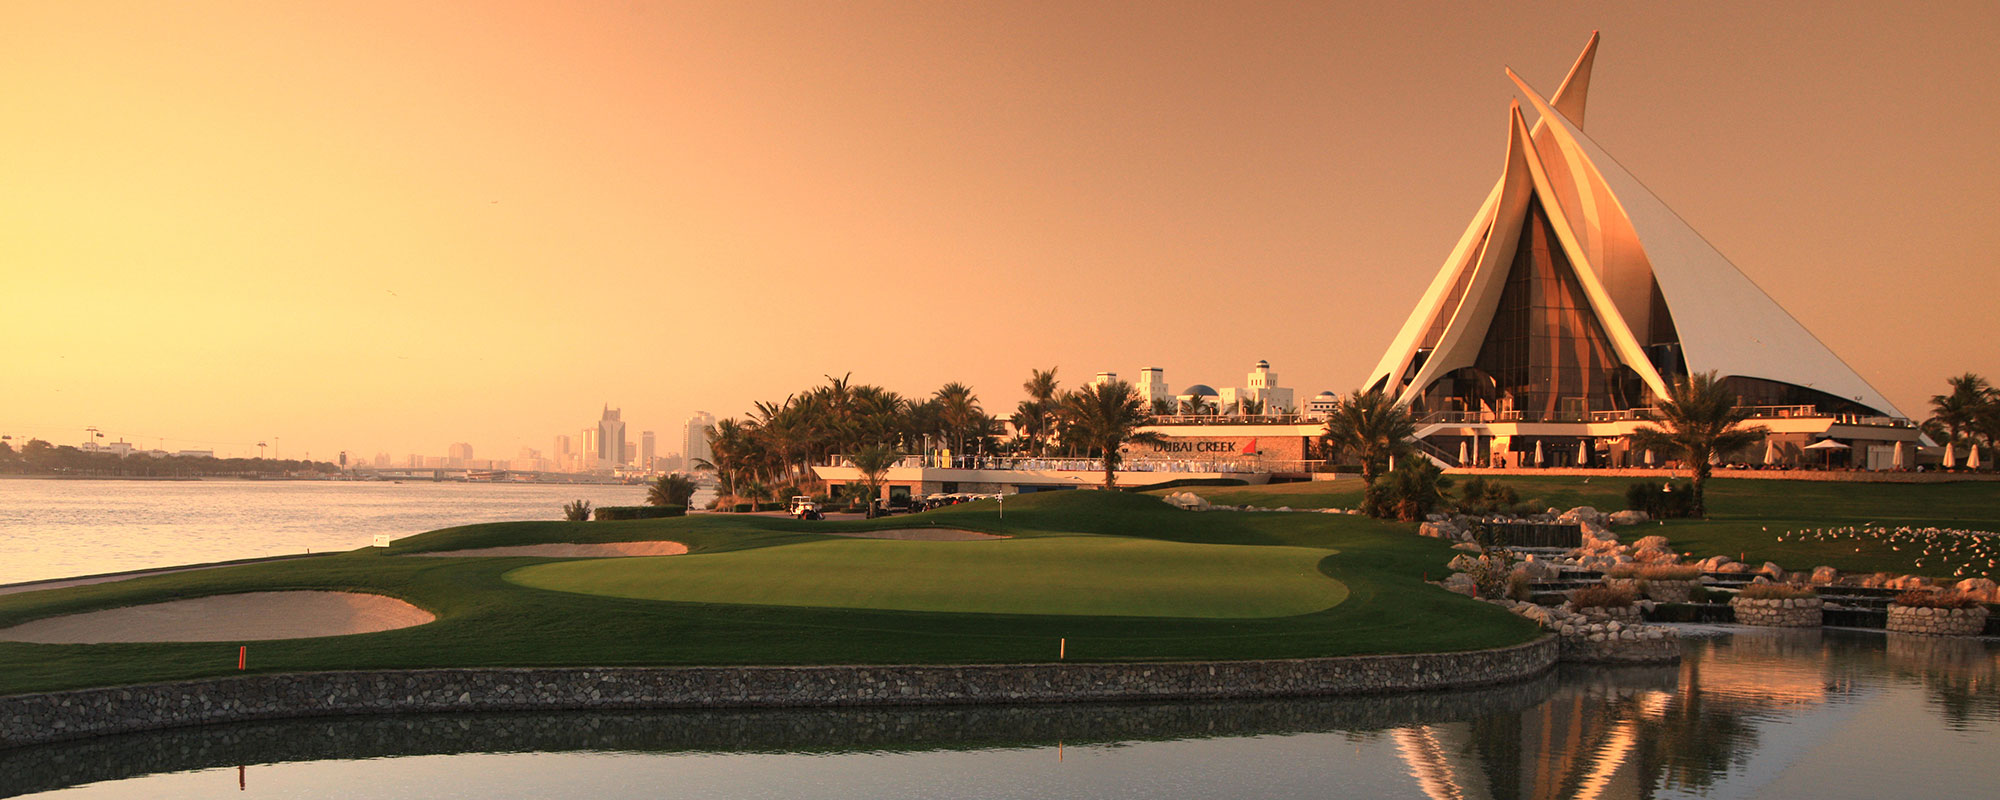 The Most Spectacular Sunsets in Golf